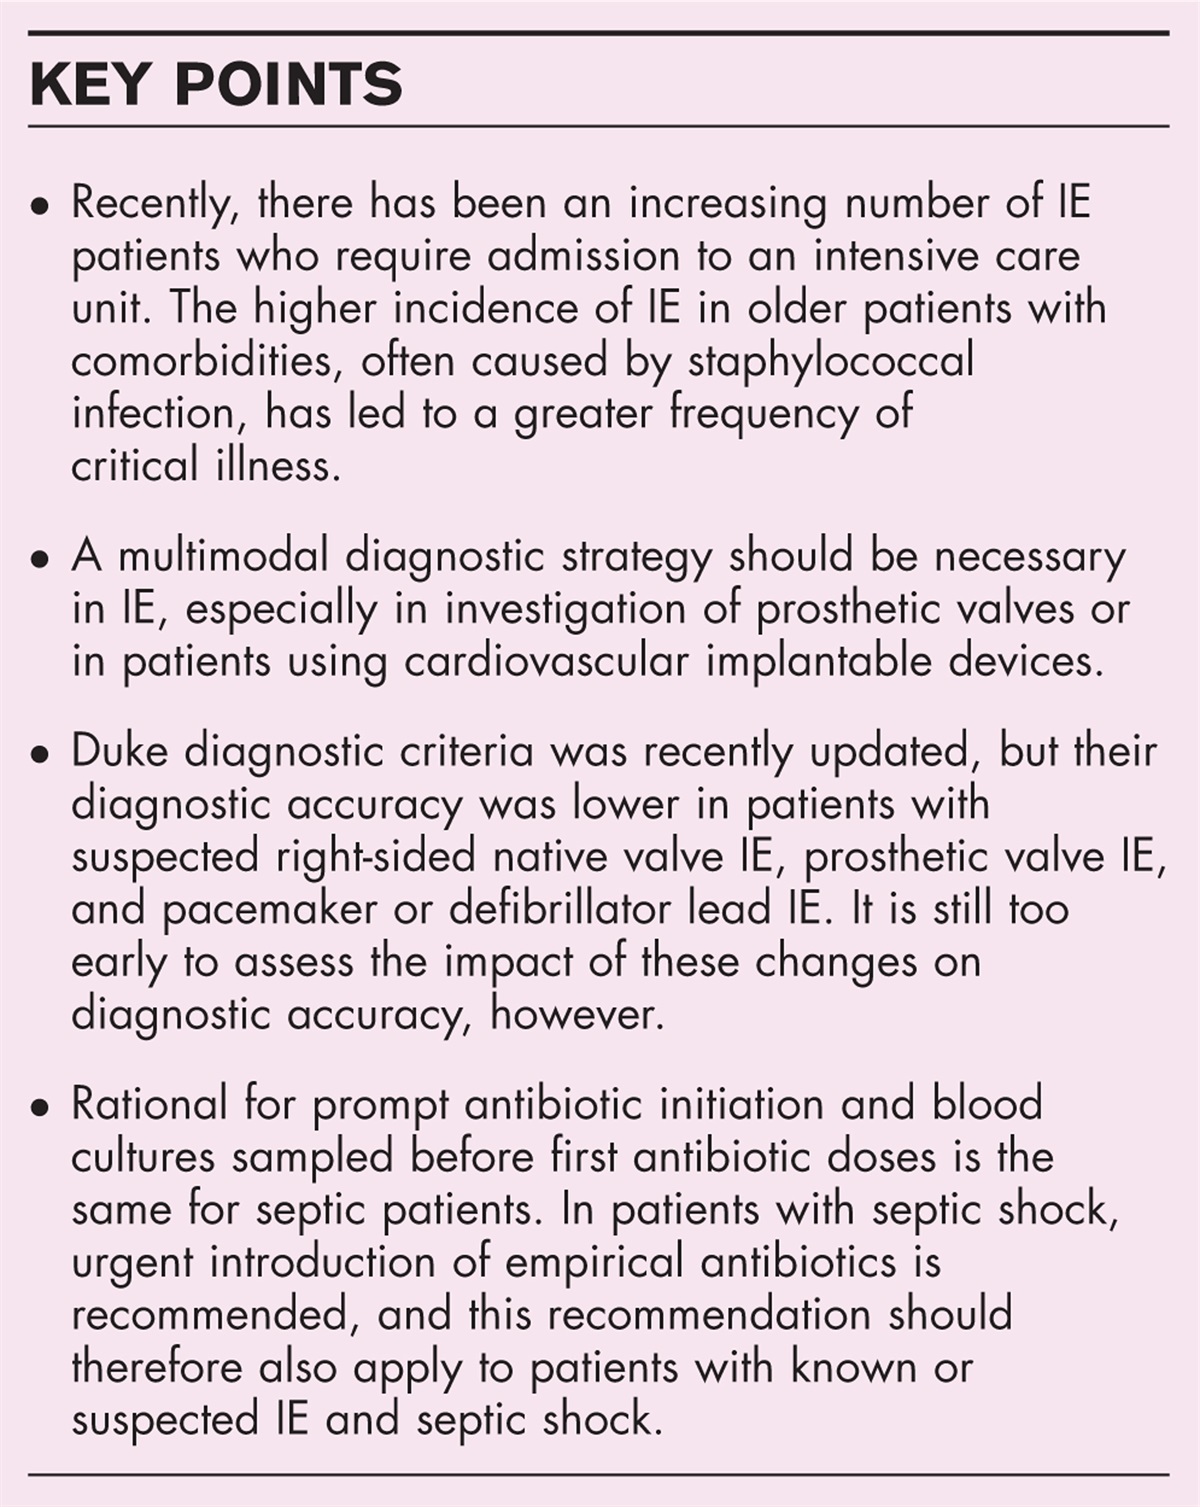 Endocarditis in critically ill patients: a review